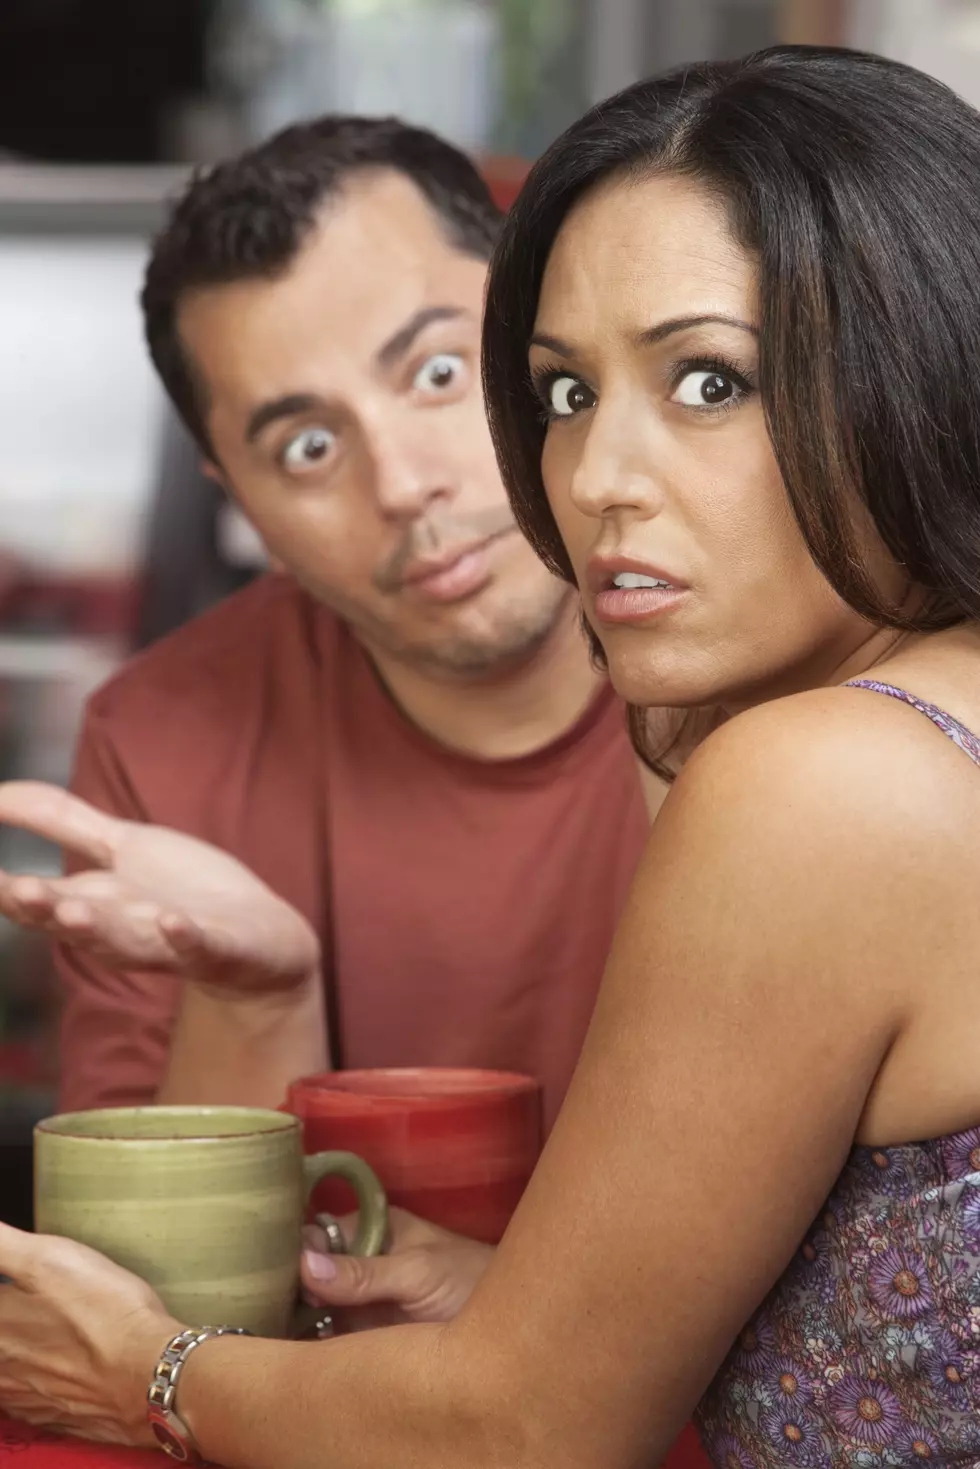 One-Third of Men Have Borrowed This From Significant Other? IMPOSSIBLE TRIVIA